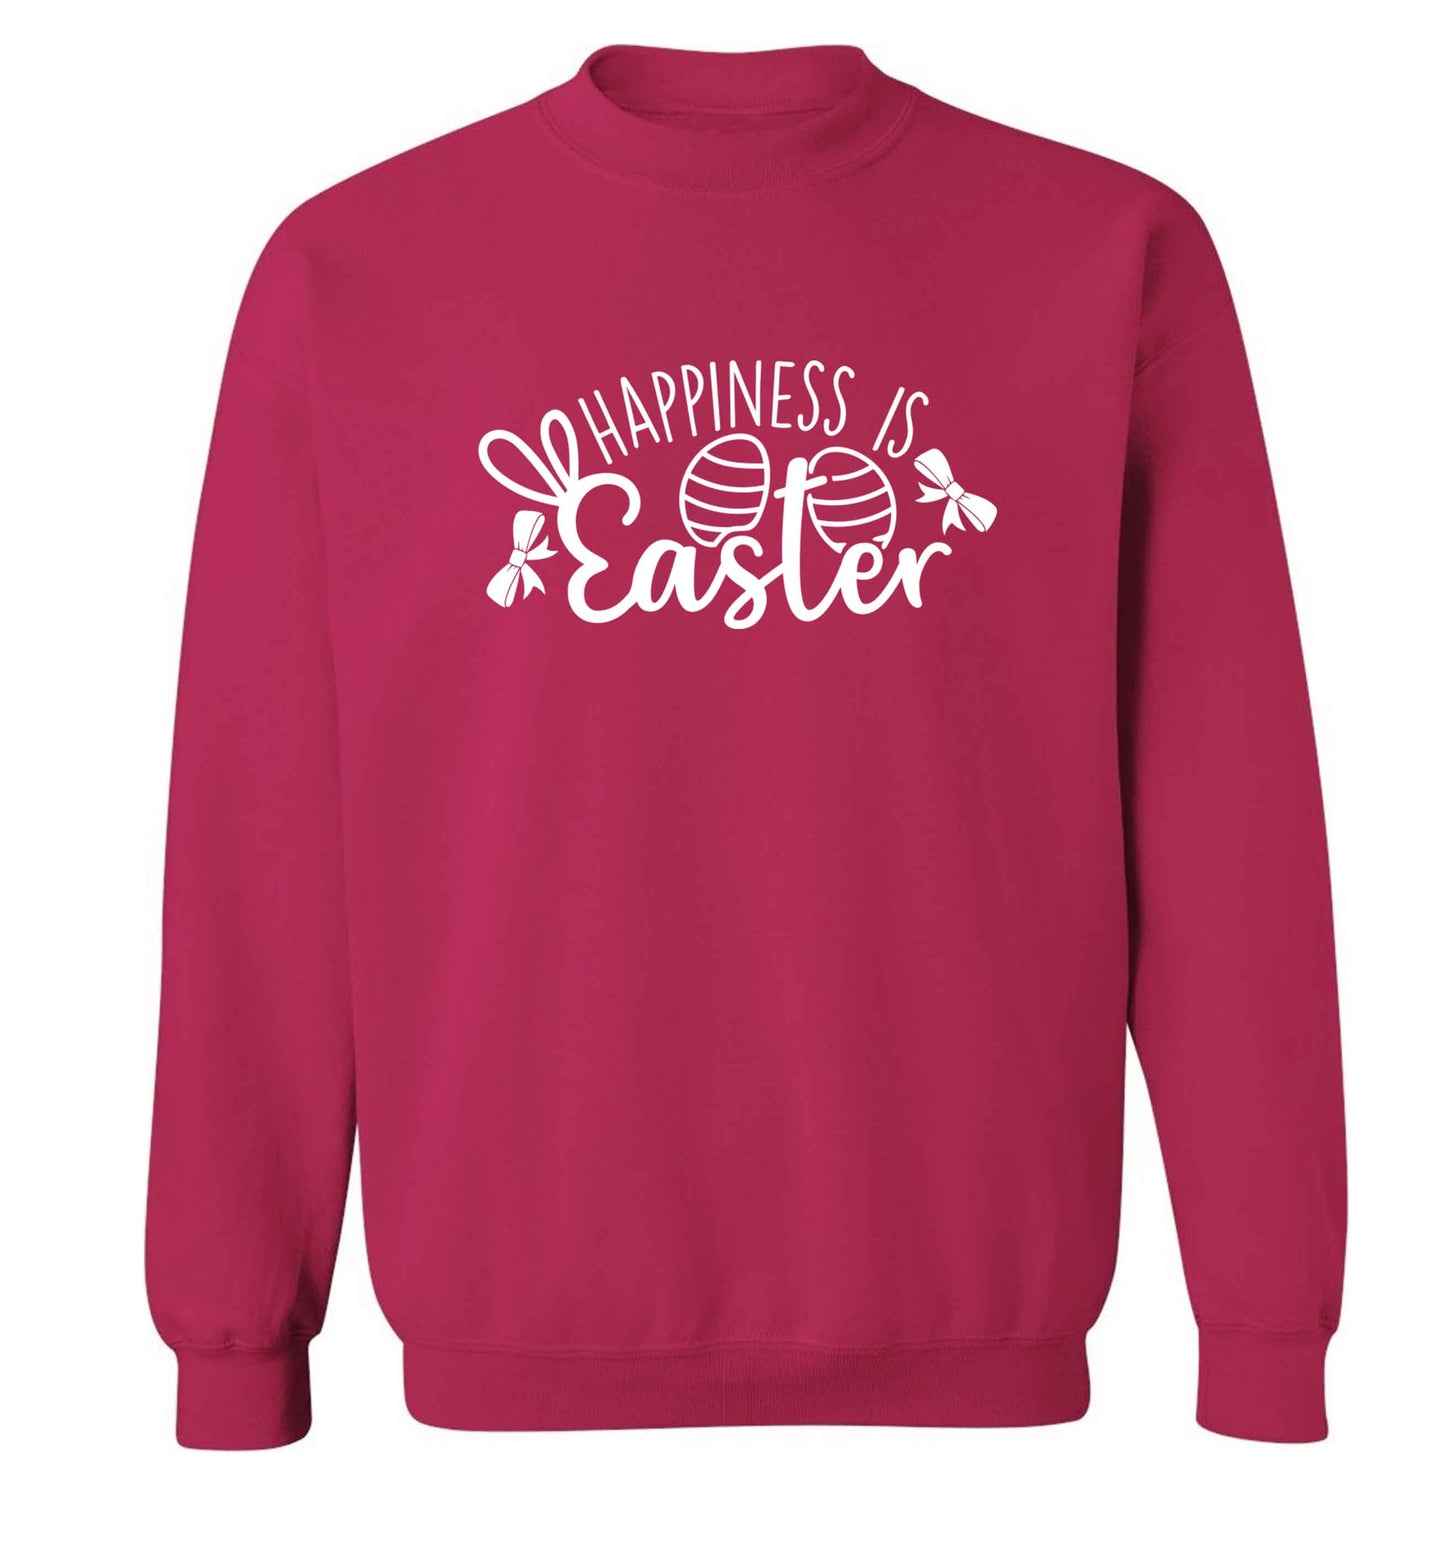 Happiness is easter adult's unisex pink sweater 2XL